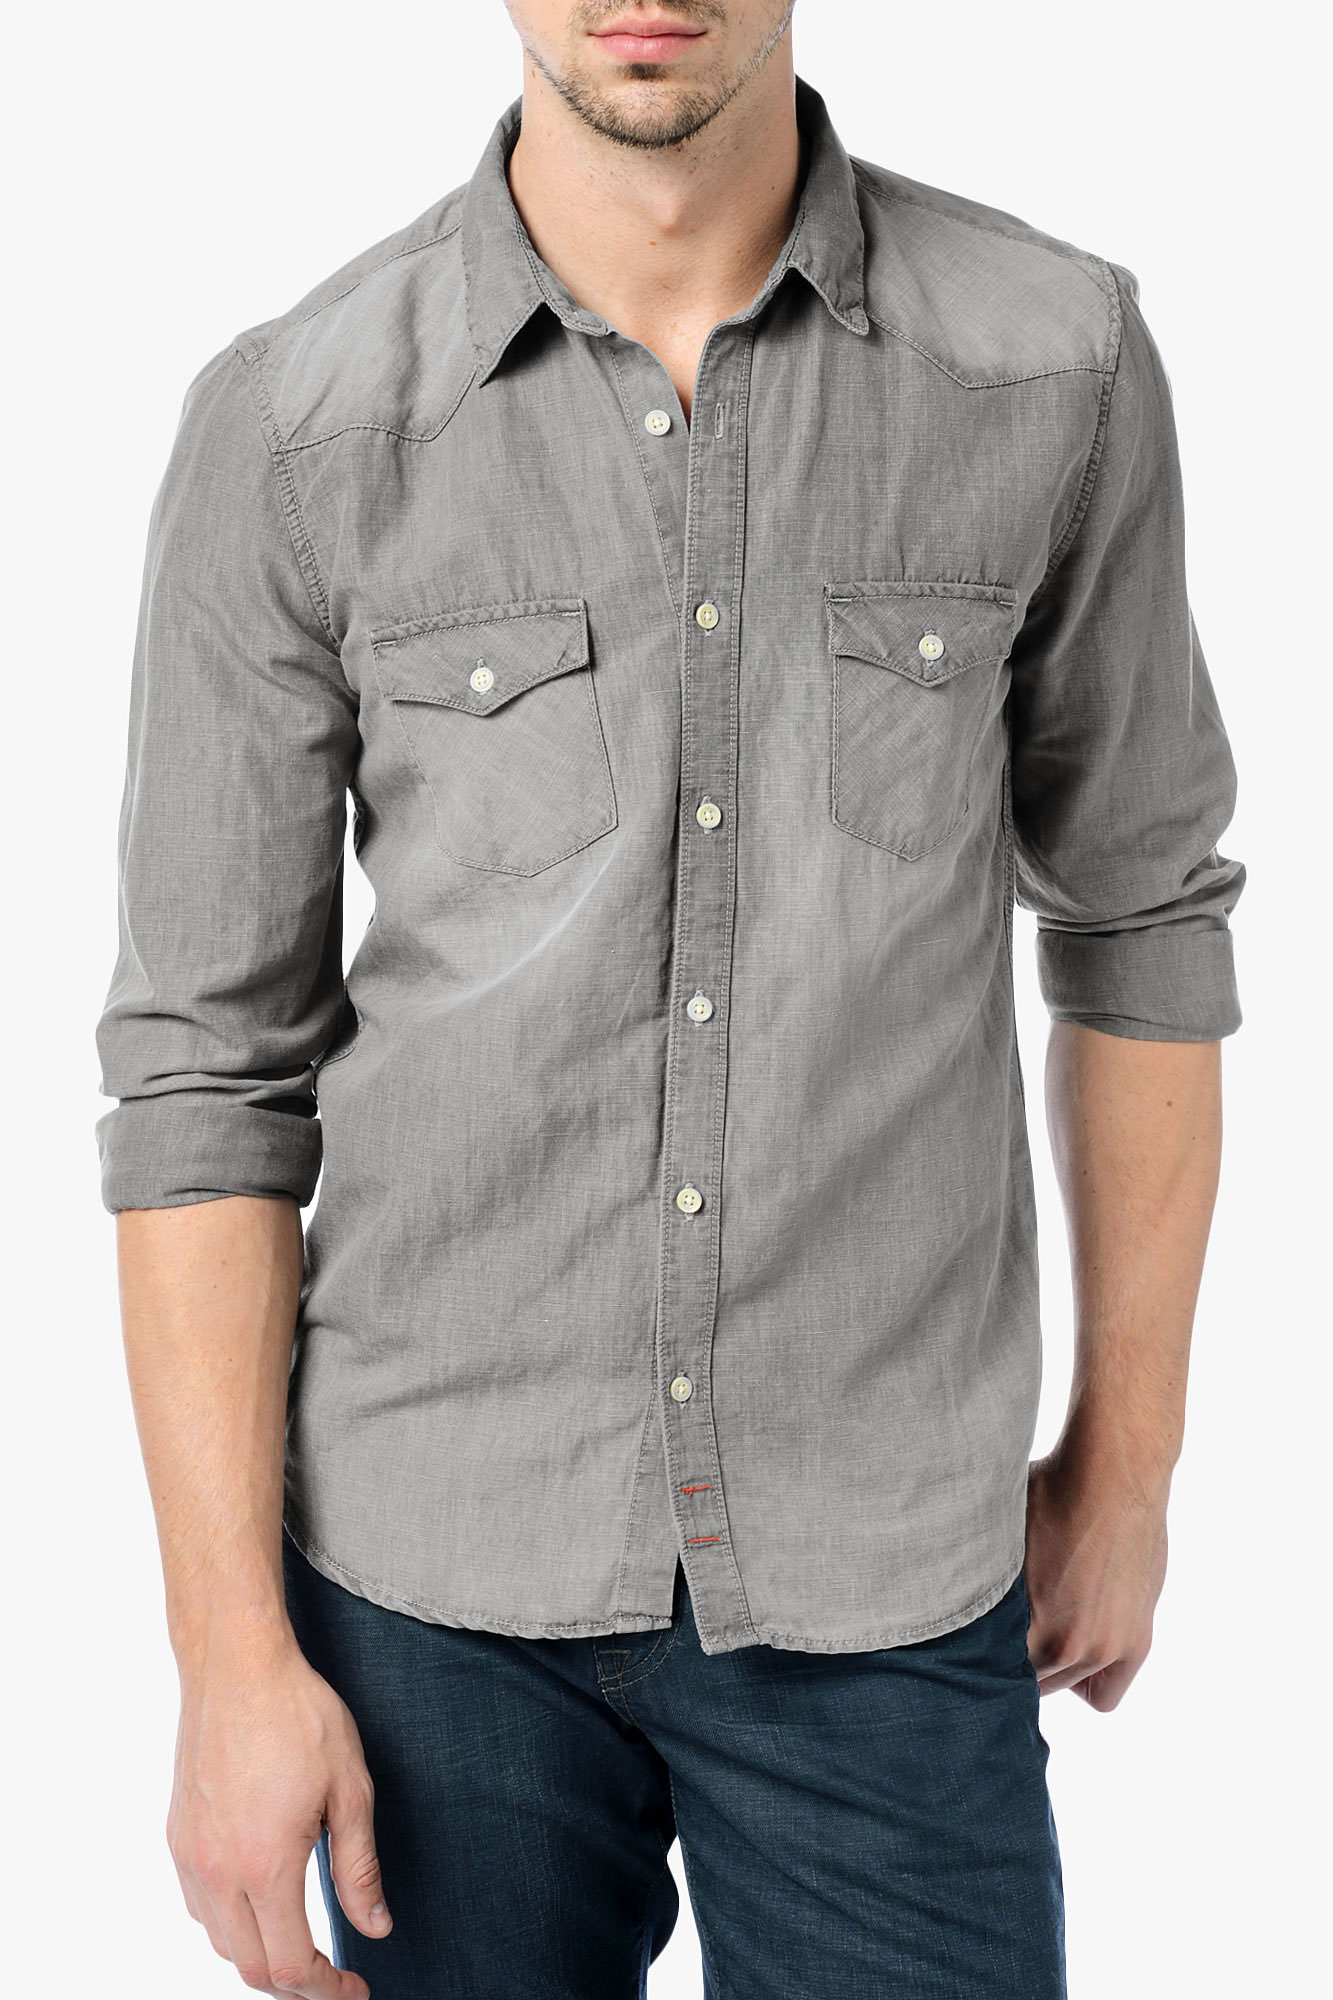 7 For All Mankind Western Shirt in Grey Chambray (Gray) for Men - Lyst